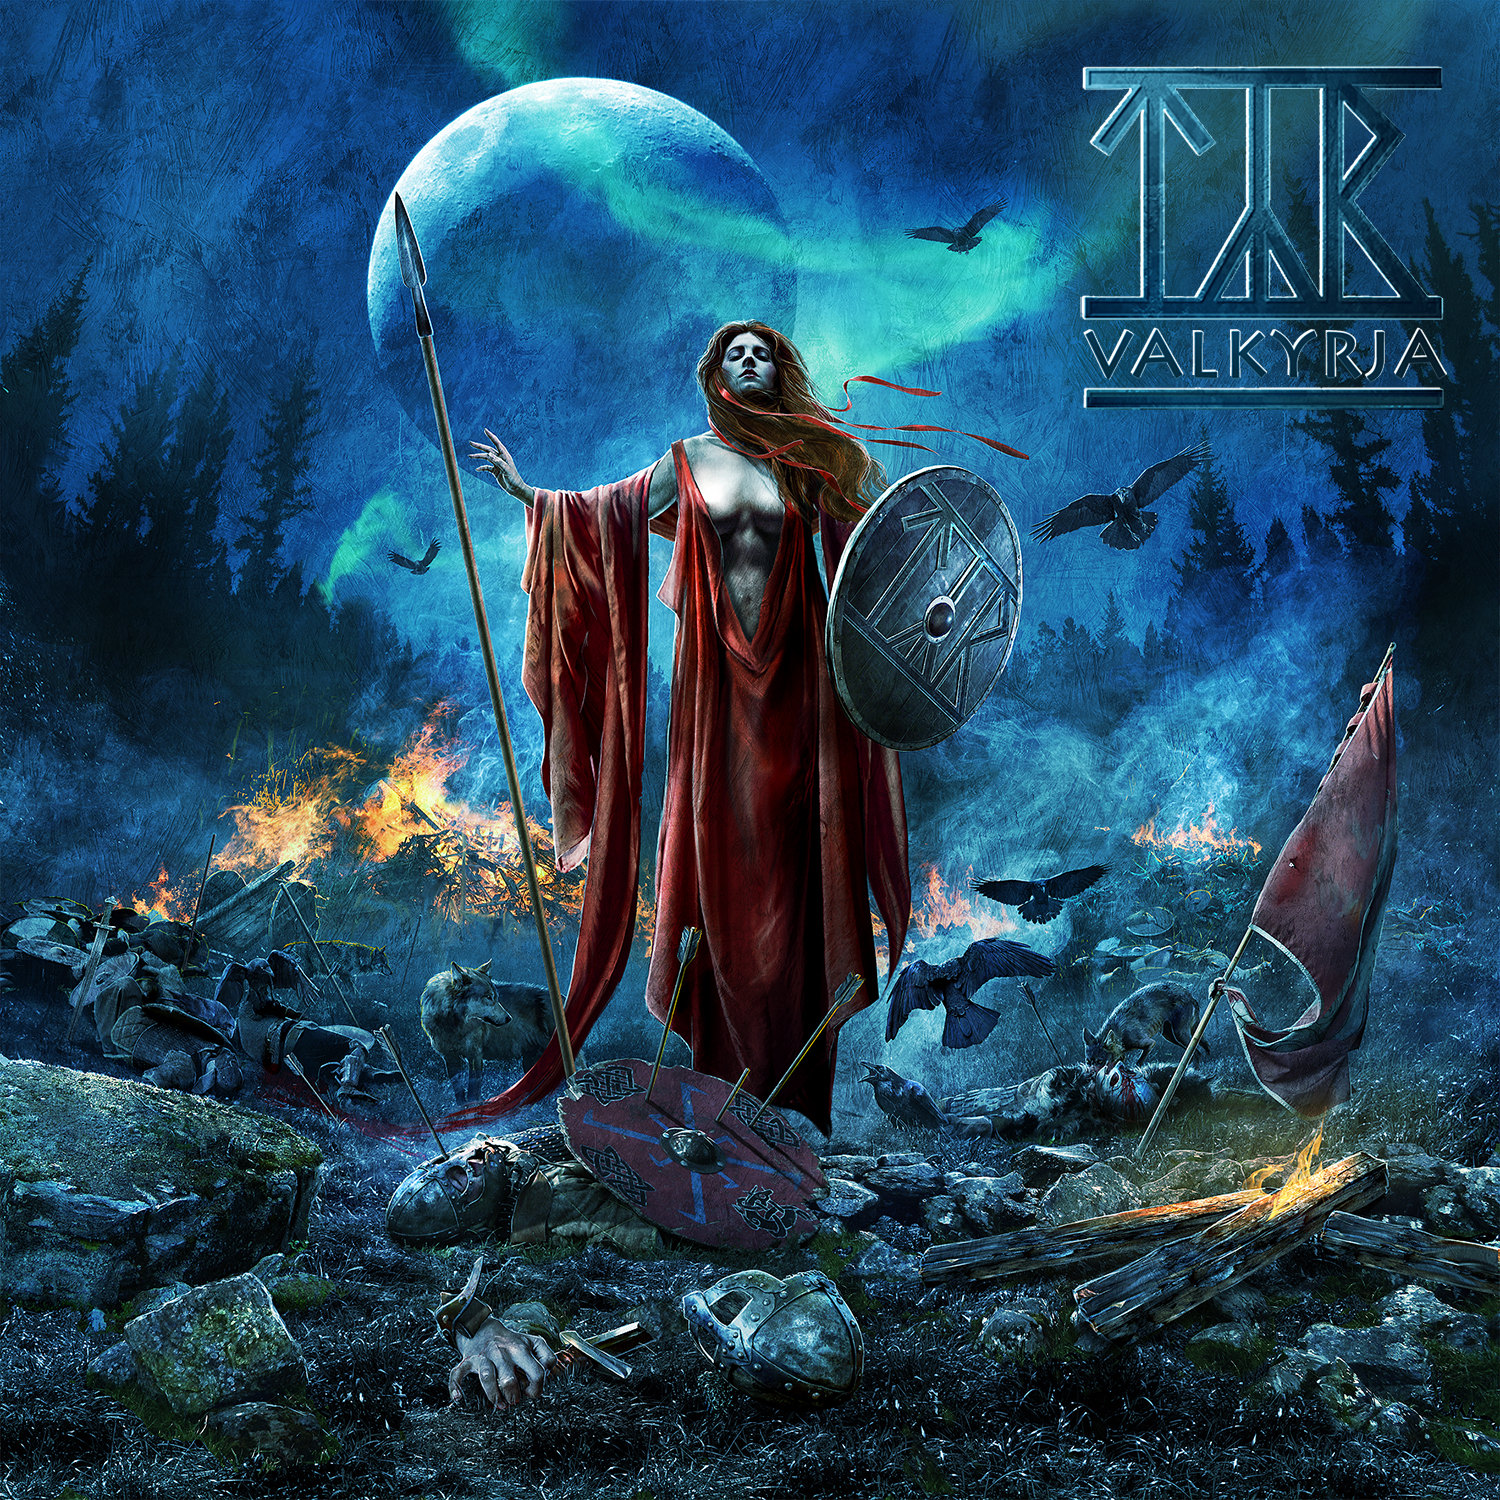 Things You Might Have Missed 2013: Týr – Valkyrja